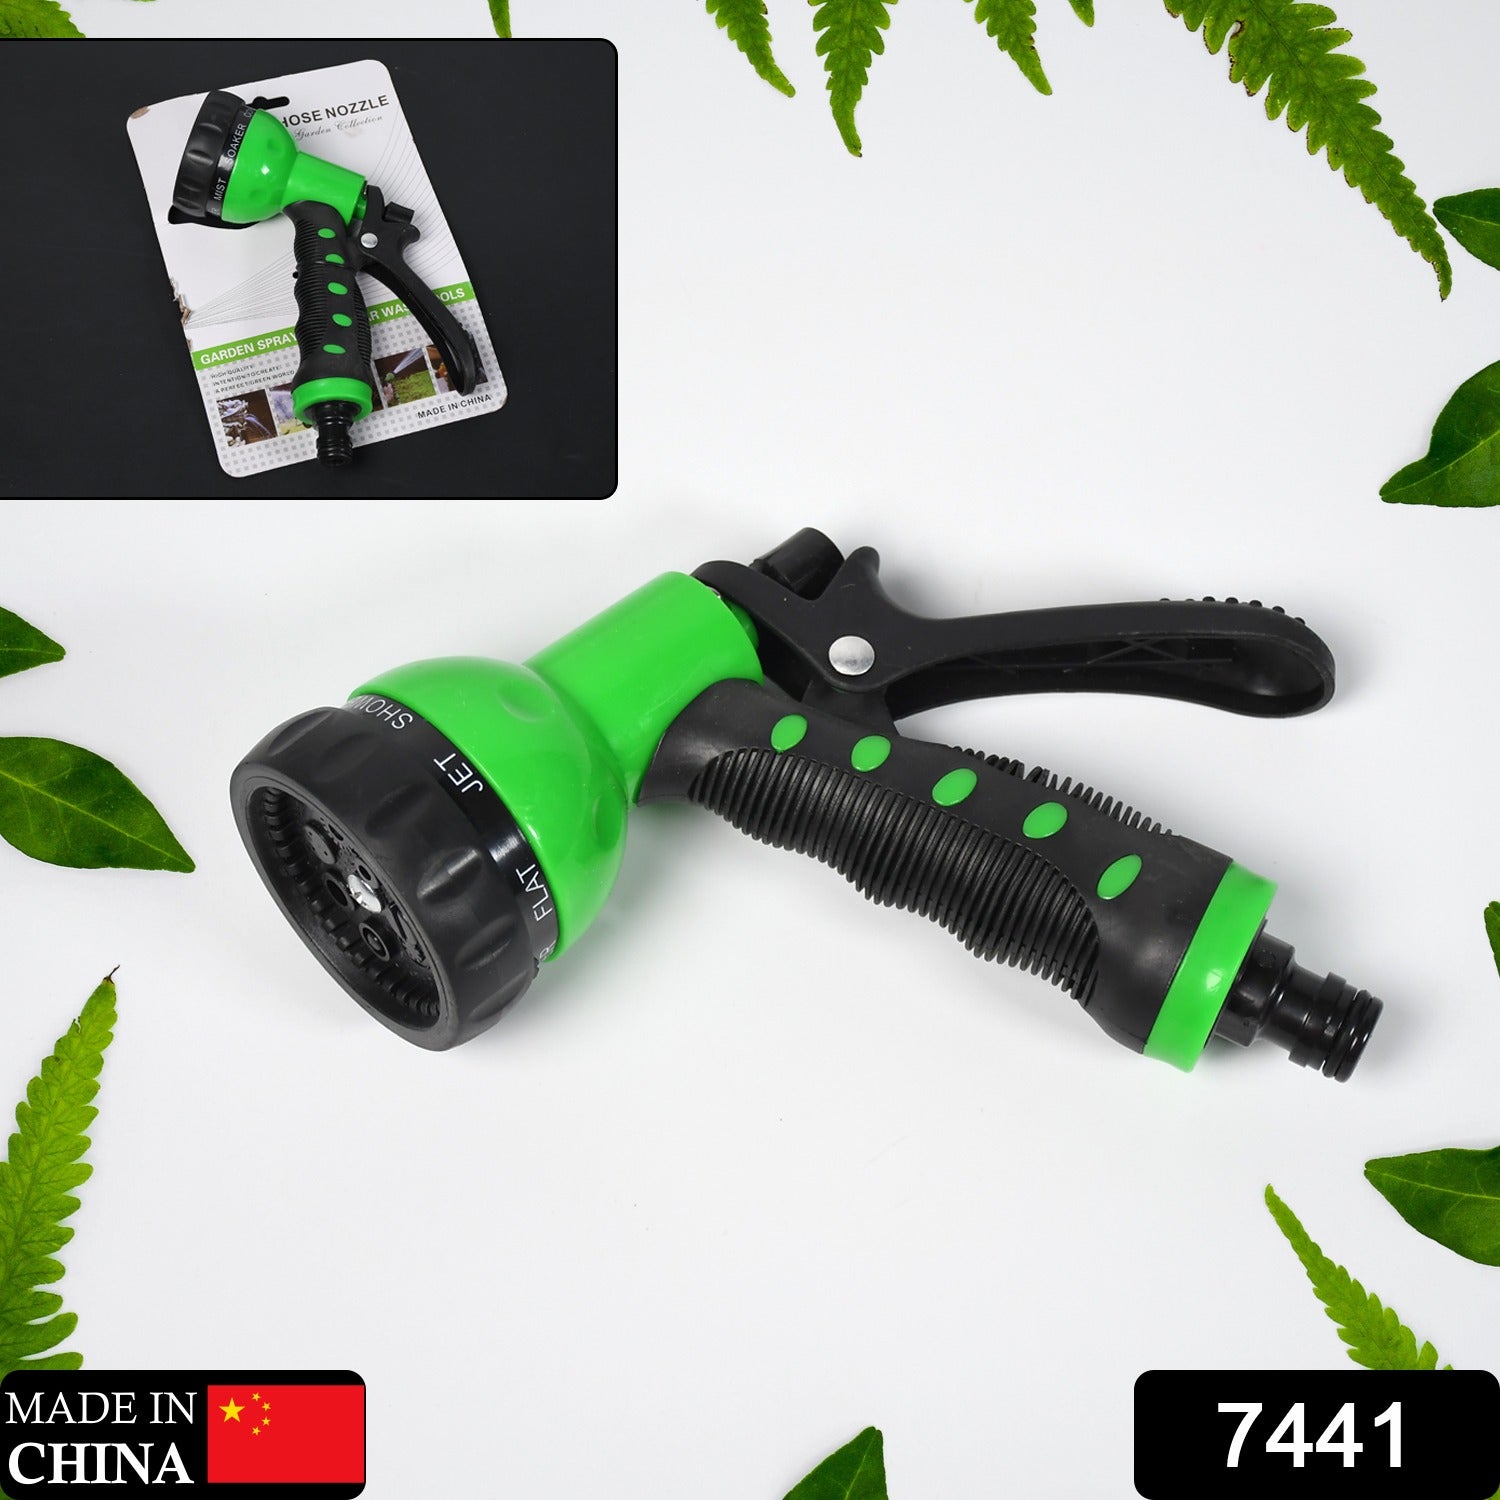 7441 Hose Nozzle Garden Hose Nozzle Hose Spray Nozzle with 8 Adjustable Patterns Front Trigger Hose Sprayer Heavy Duty Metal Water Hose Nozzle for Cleaning, Watering, Washing, Bathing 